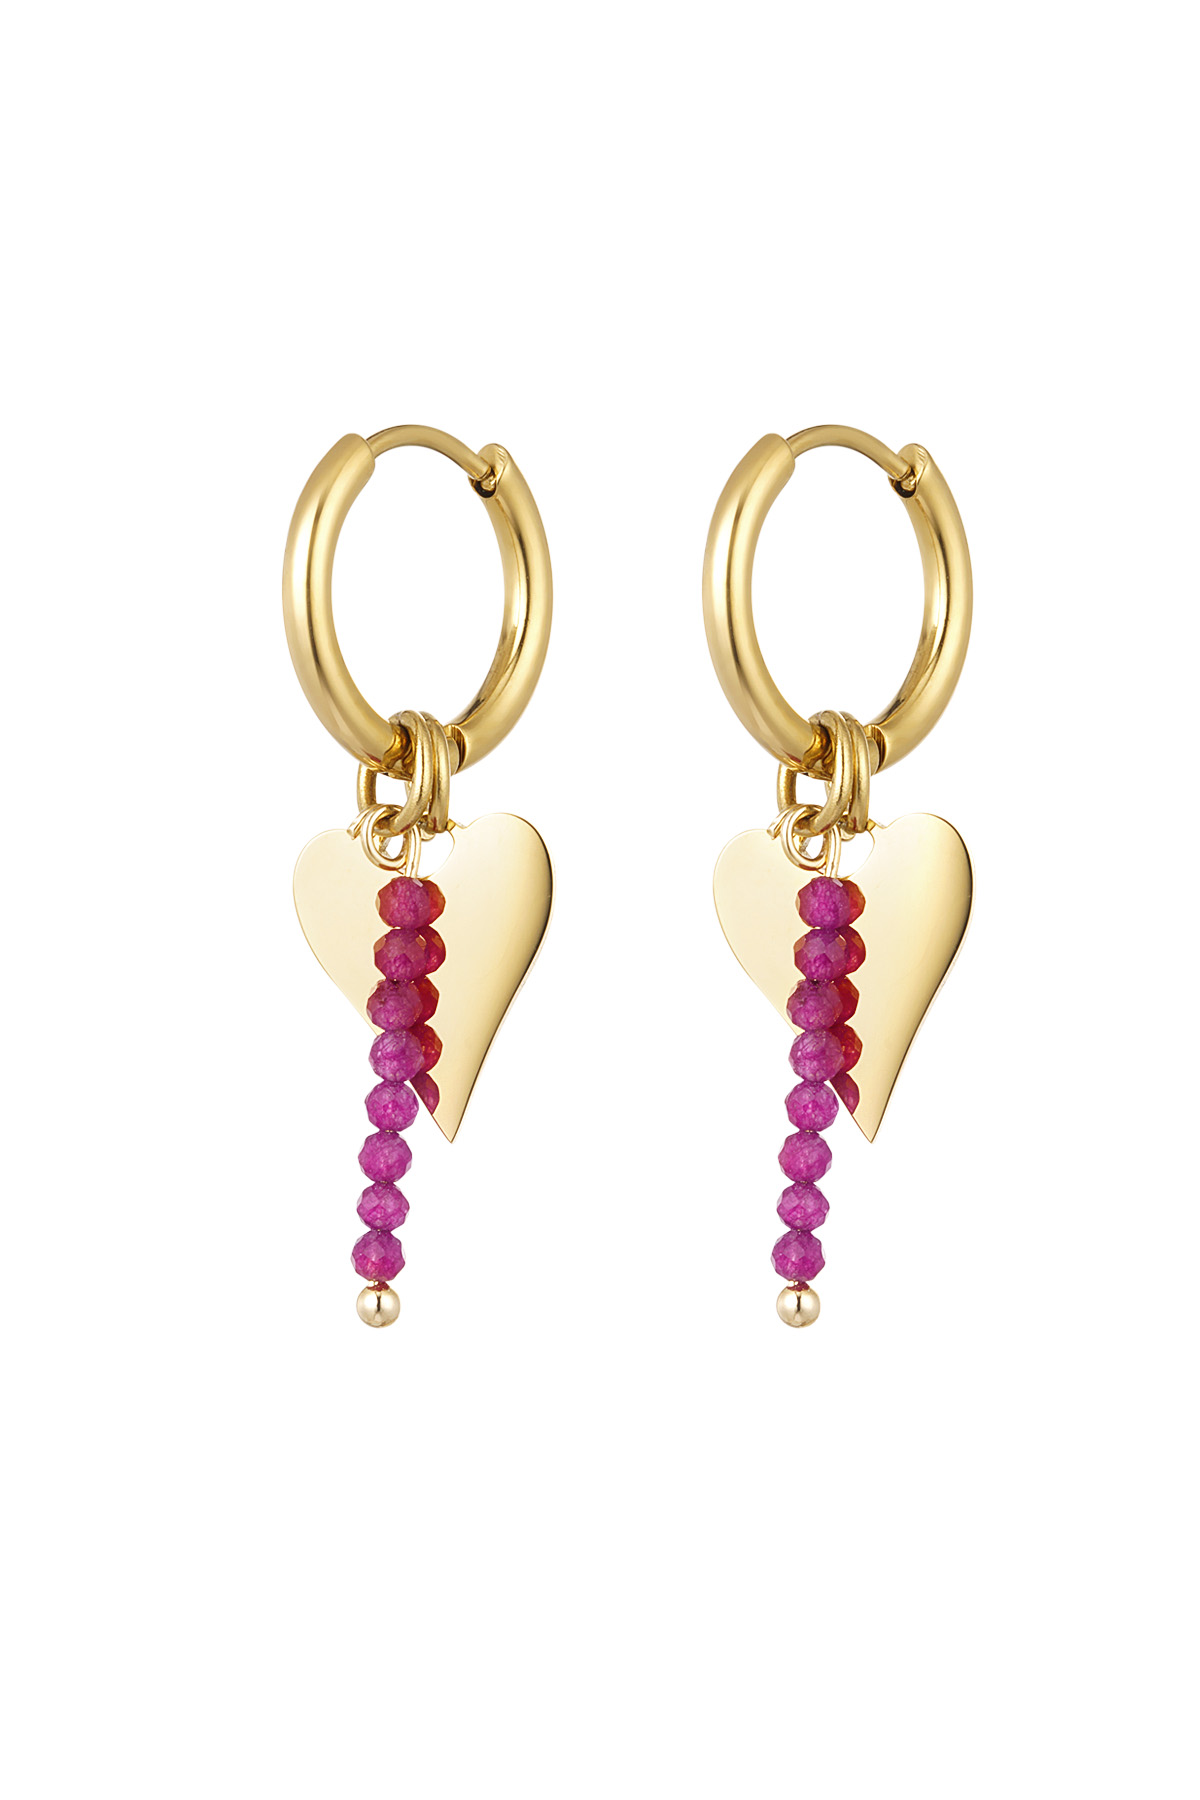 Earrings heart with beads - gold/pink